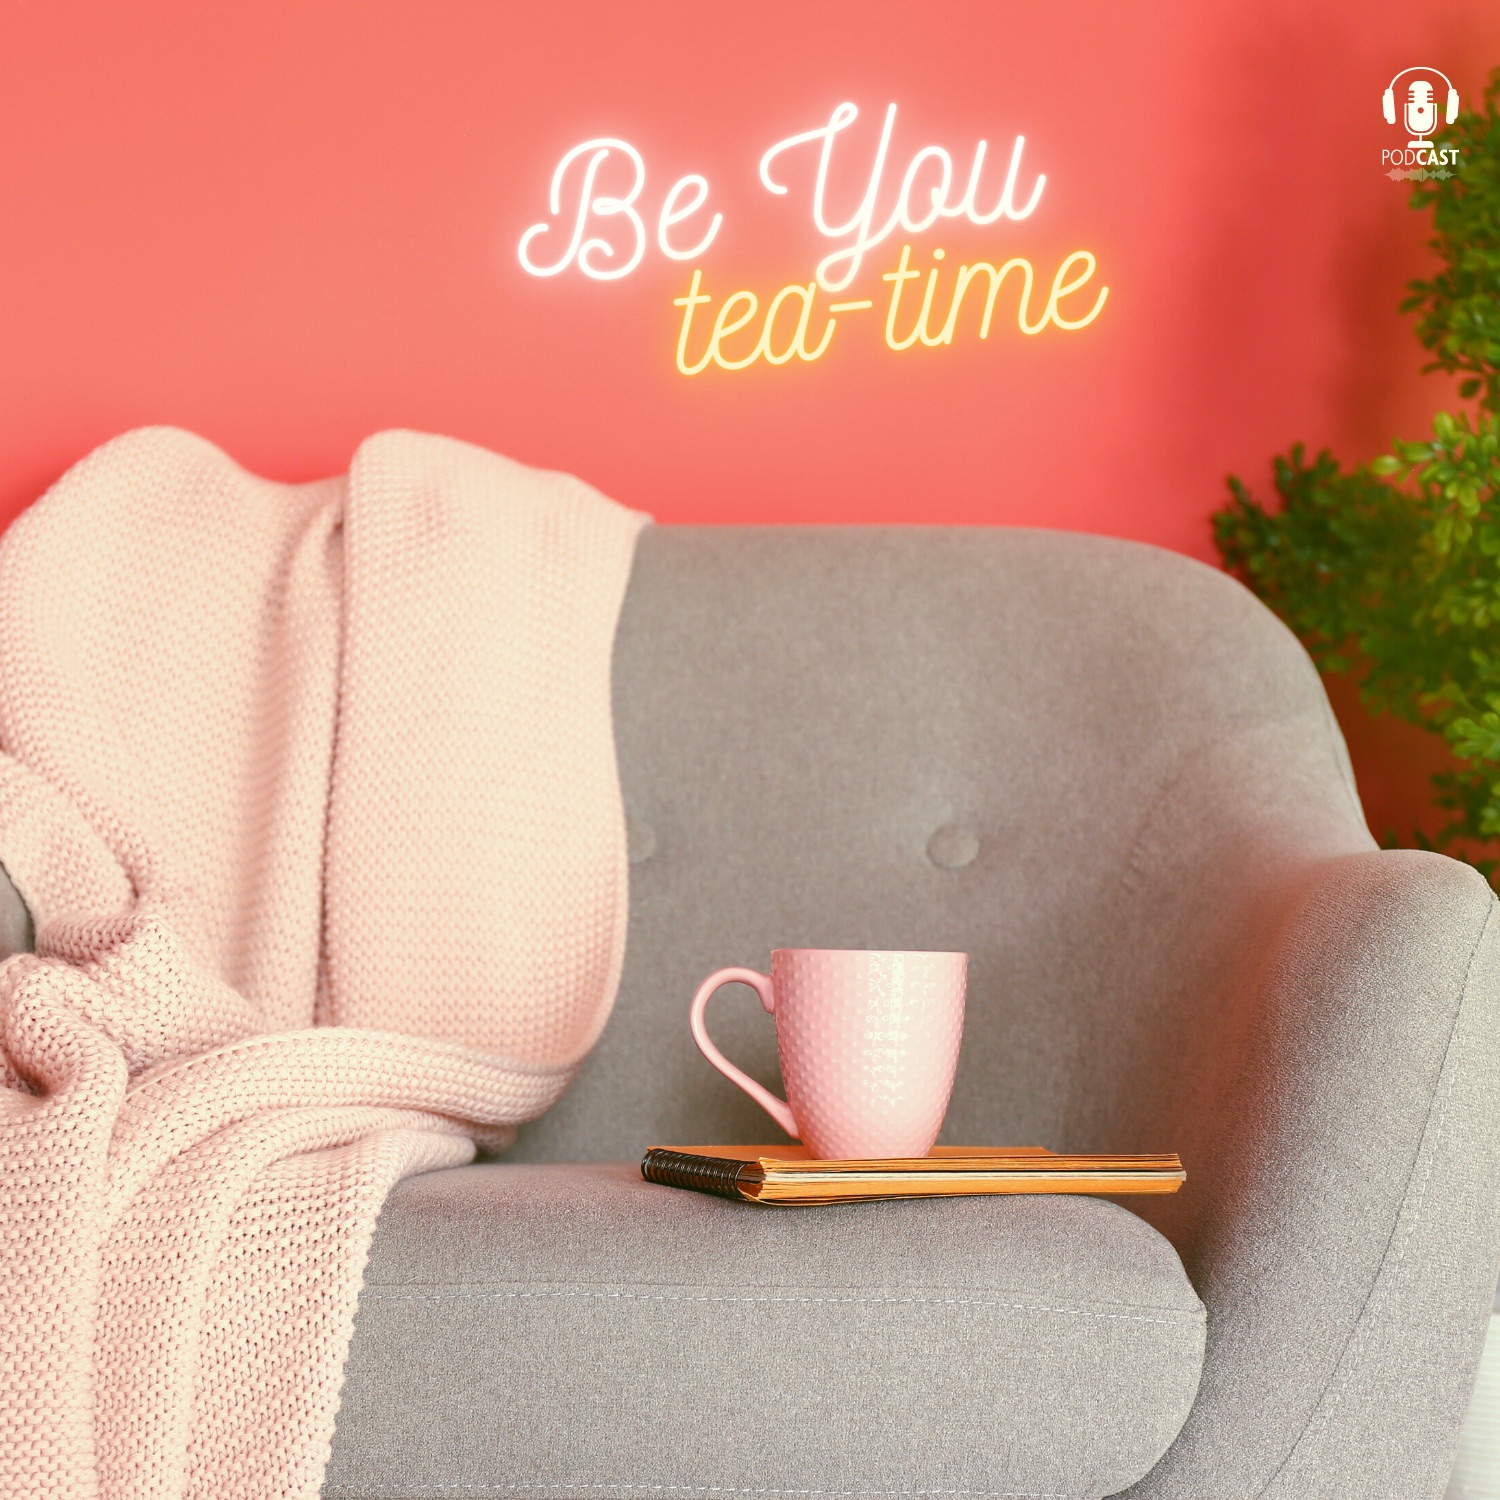 Be You Tea Time - The Podcast